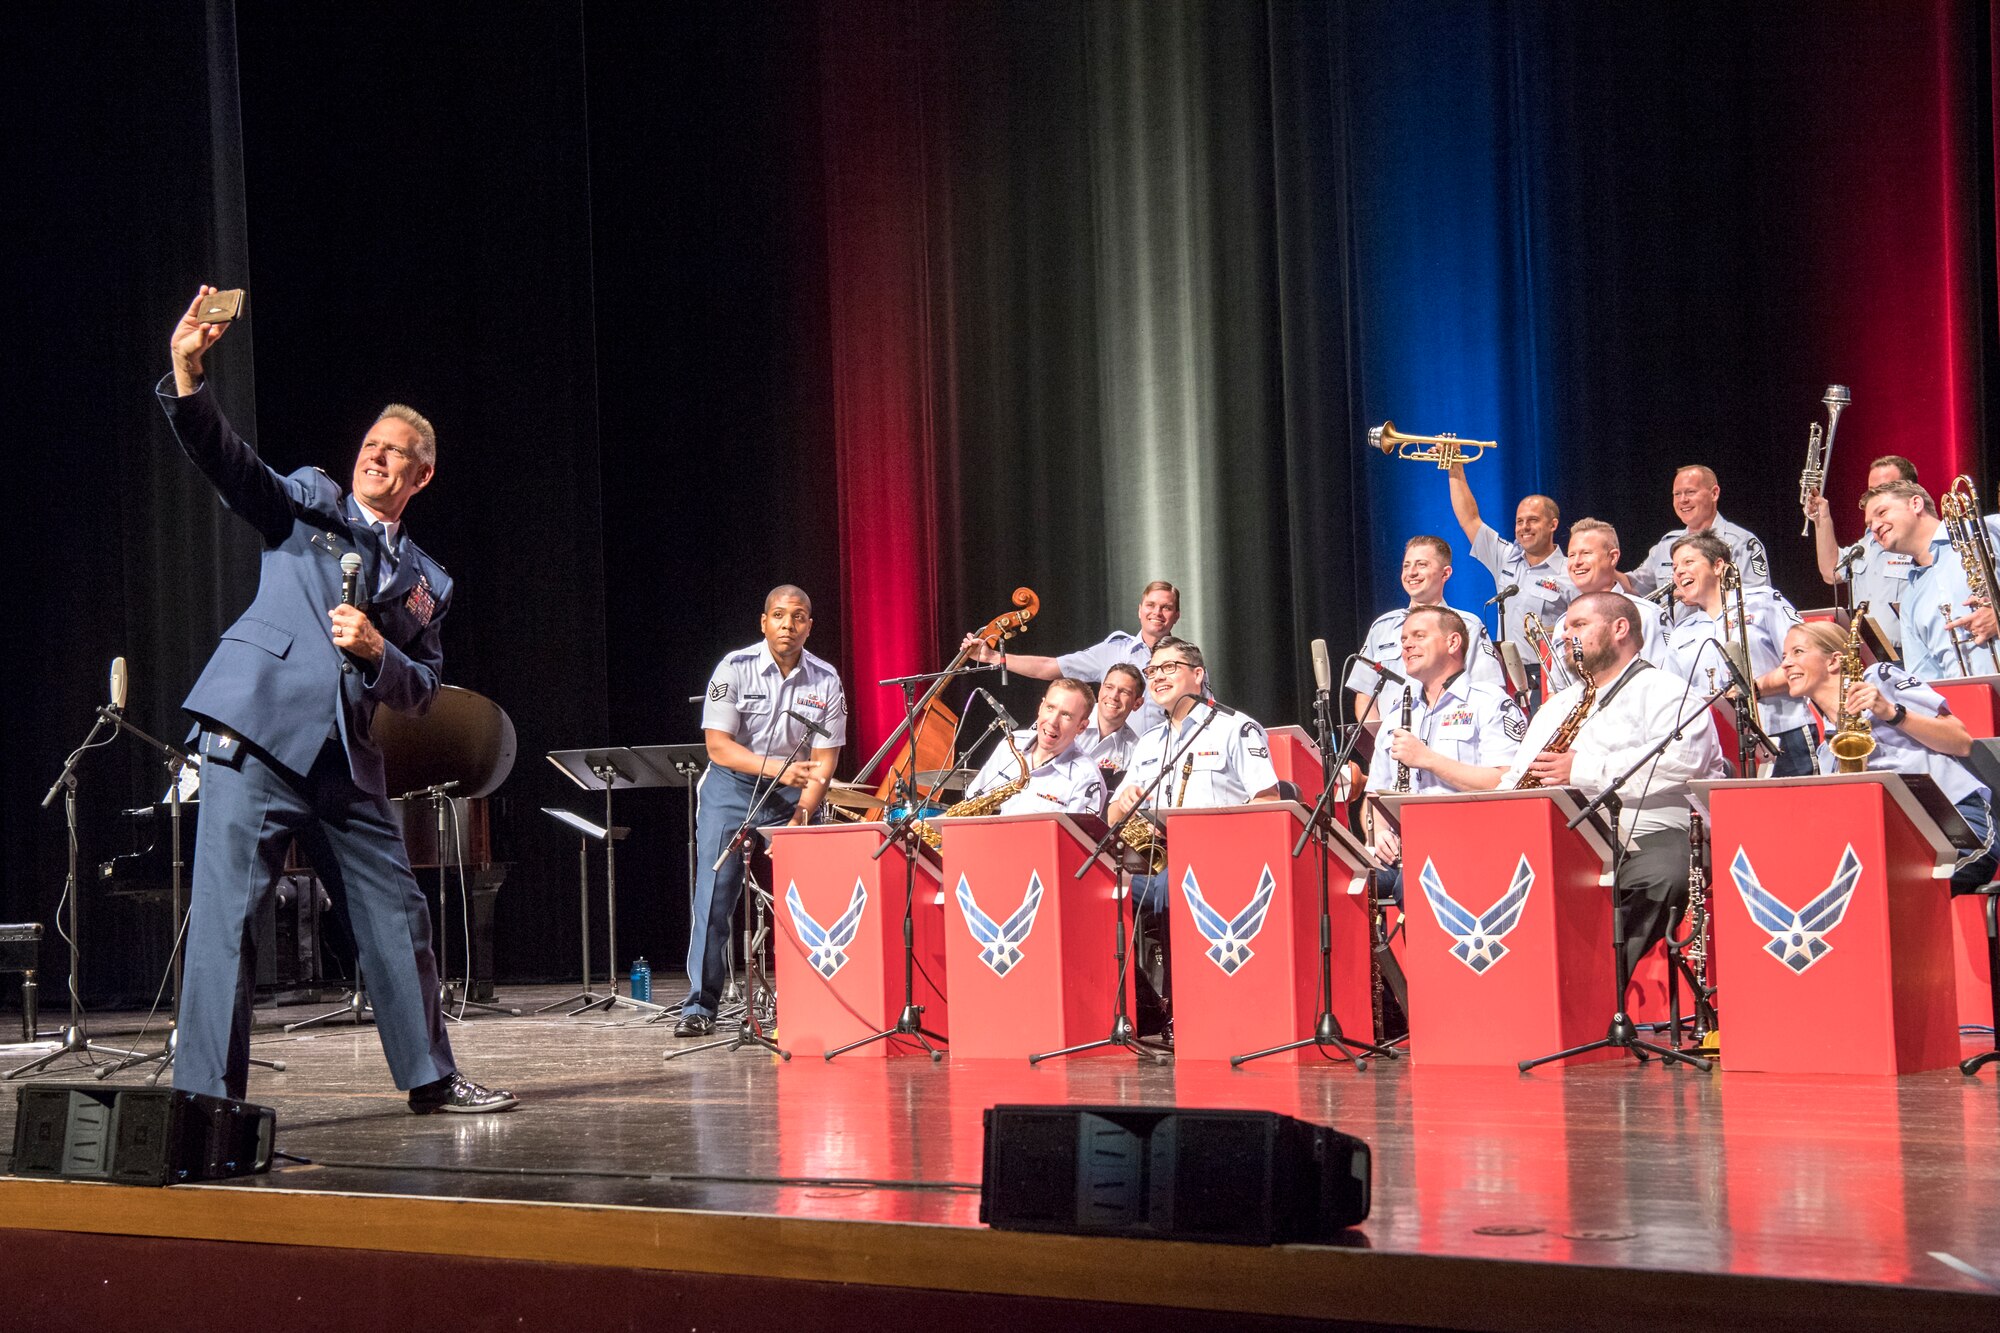 Col. Larry Shaw, 434th Air Refueling Wing commander, takes a selfie with the U.S. Air Force Band of Mid-America Shades of Blue Jazz Ensemble Sept. 10, 2019 at the Honeywell Center in Wabash, Indiana. During the concert Shaw thanked attendees for their support of the military and the Hoosier Wing. (U.S. Air Force photo/Master Sgt. Ben Mota)